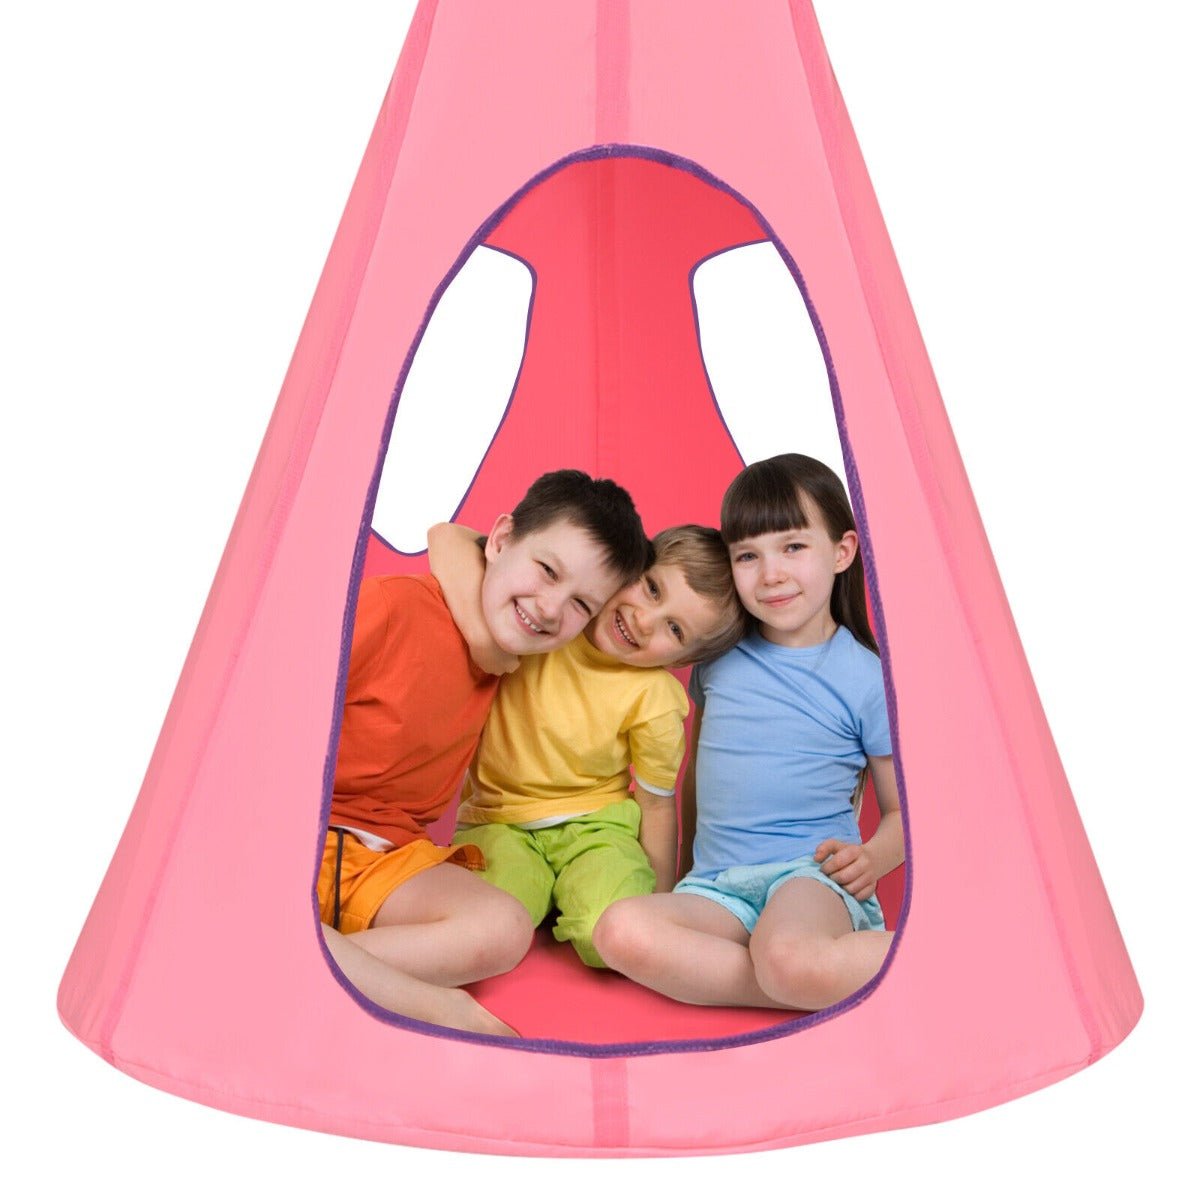 Pink Paradise: Kids Nest Swing Tent Pink 80cm, Swing and Dream